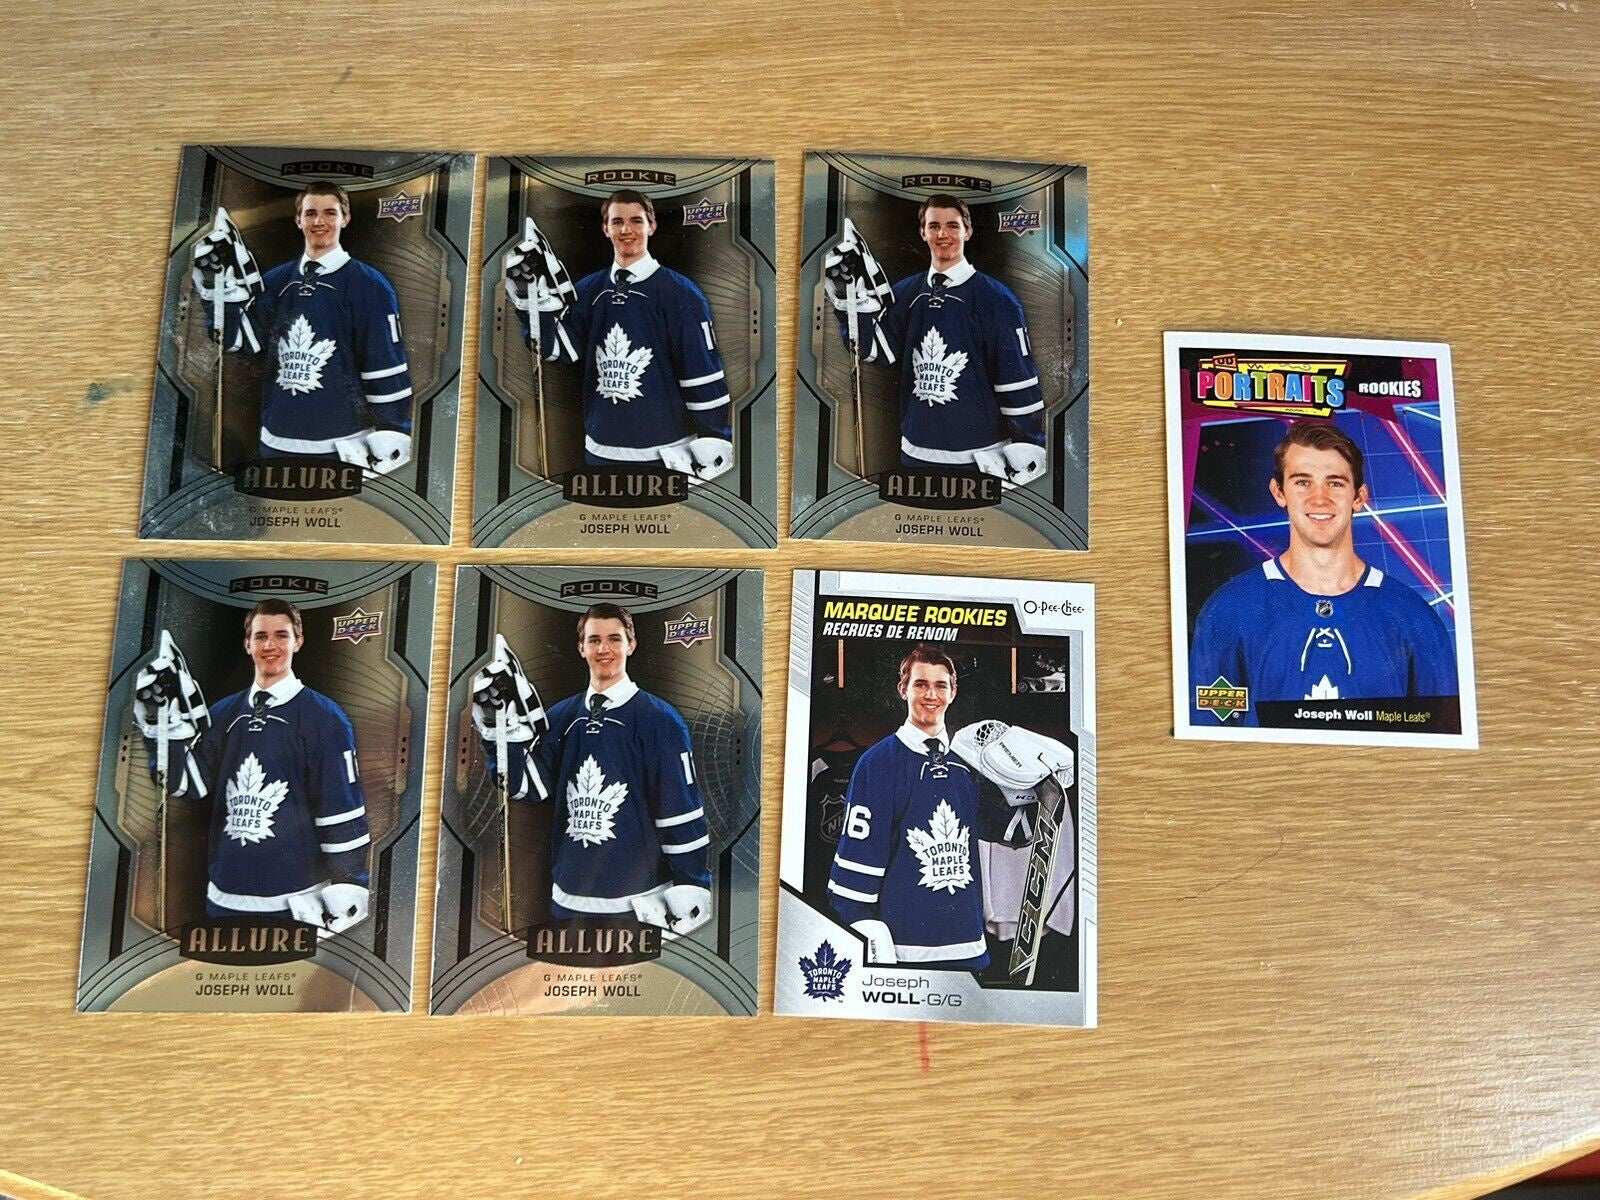 2020-21 Joseph Woll RC (Rookie Card) (1x Randomly Selected RC, May Not Be In the Photo)